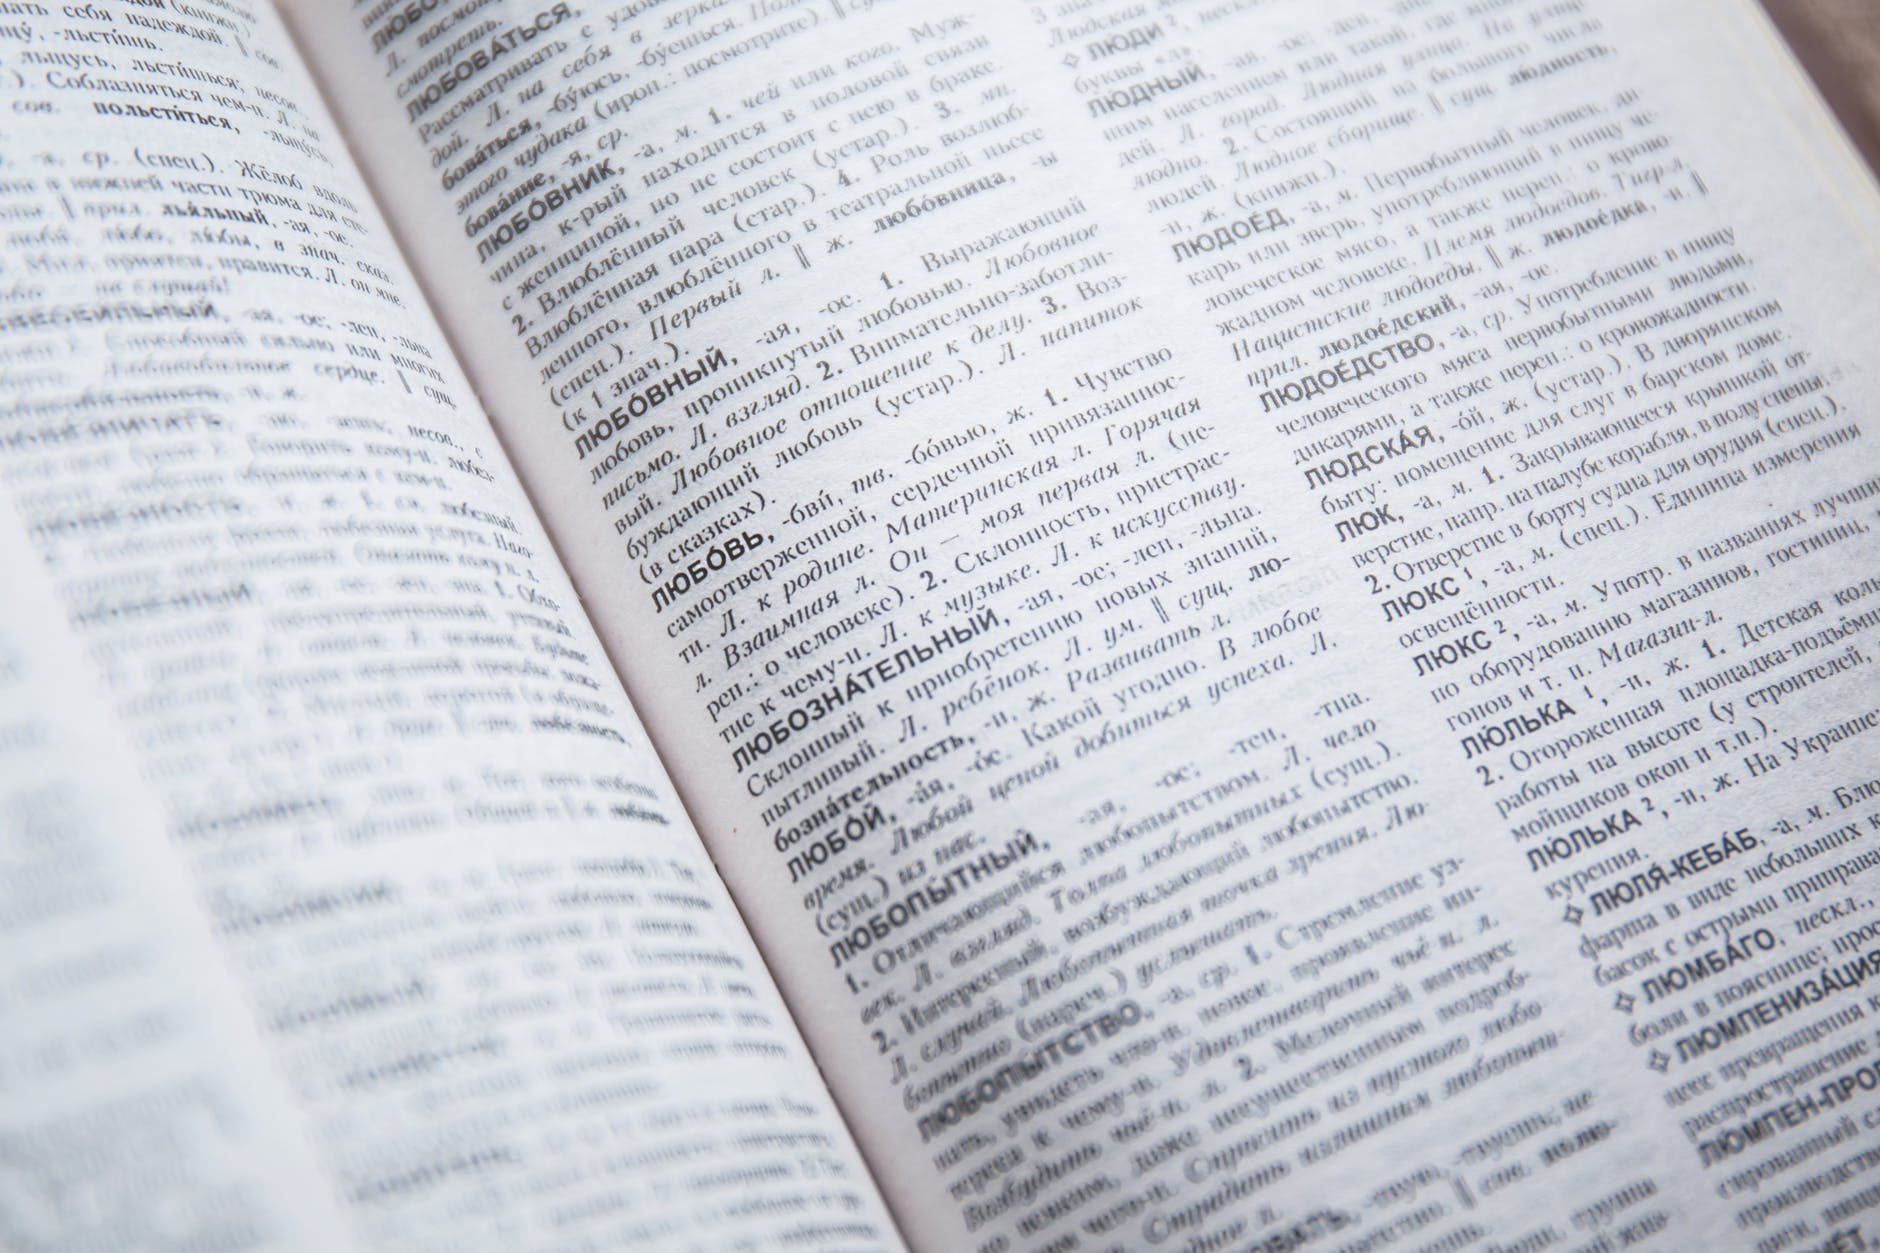 A dictionary used for learning and understanding phrasal verbs.